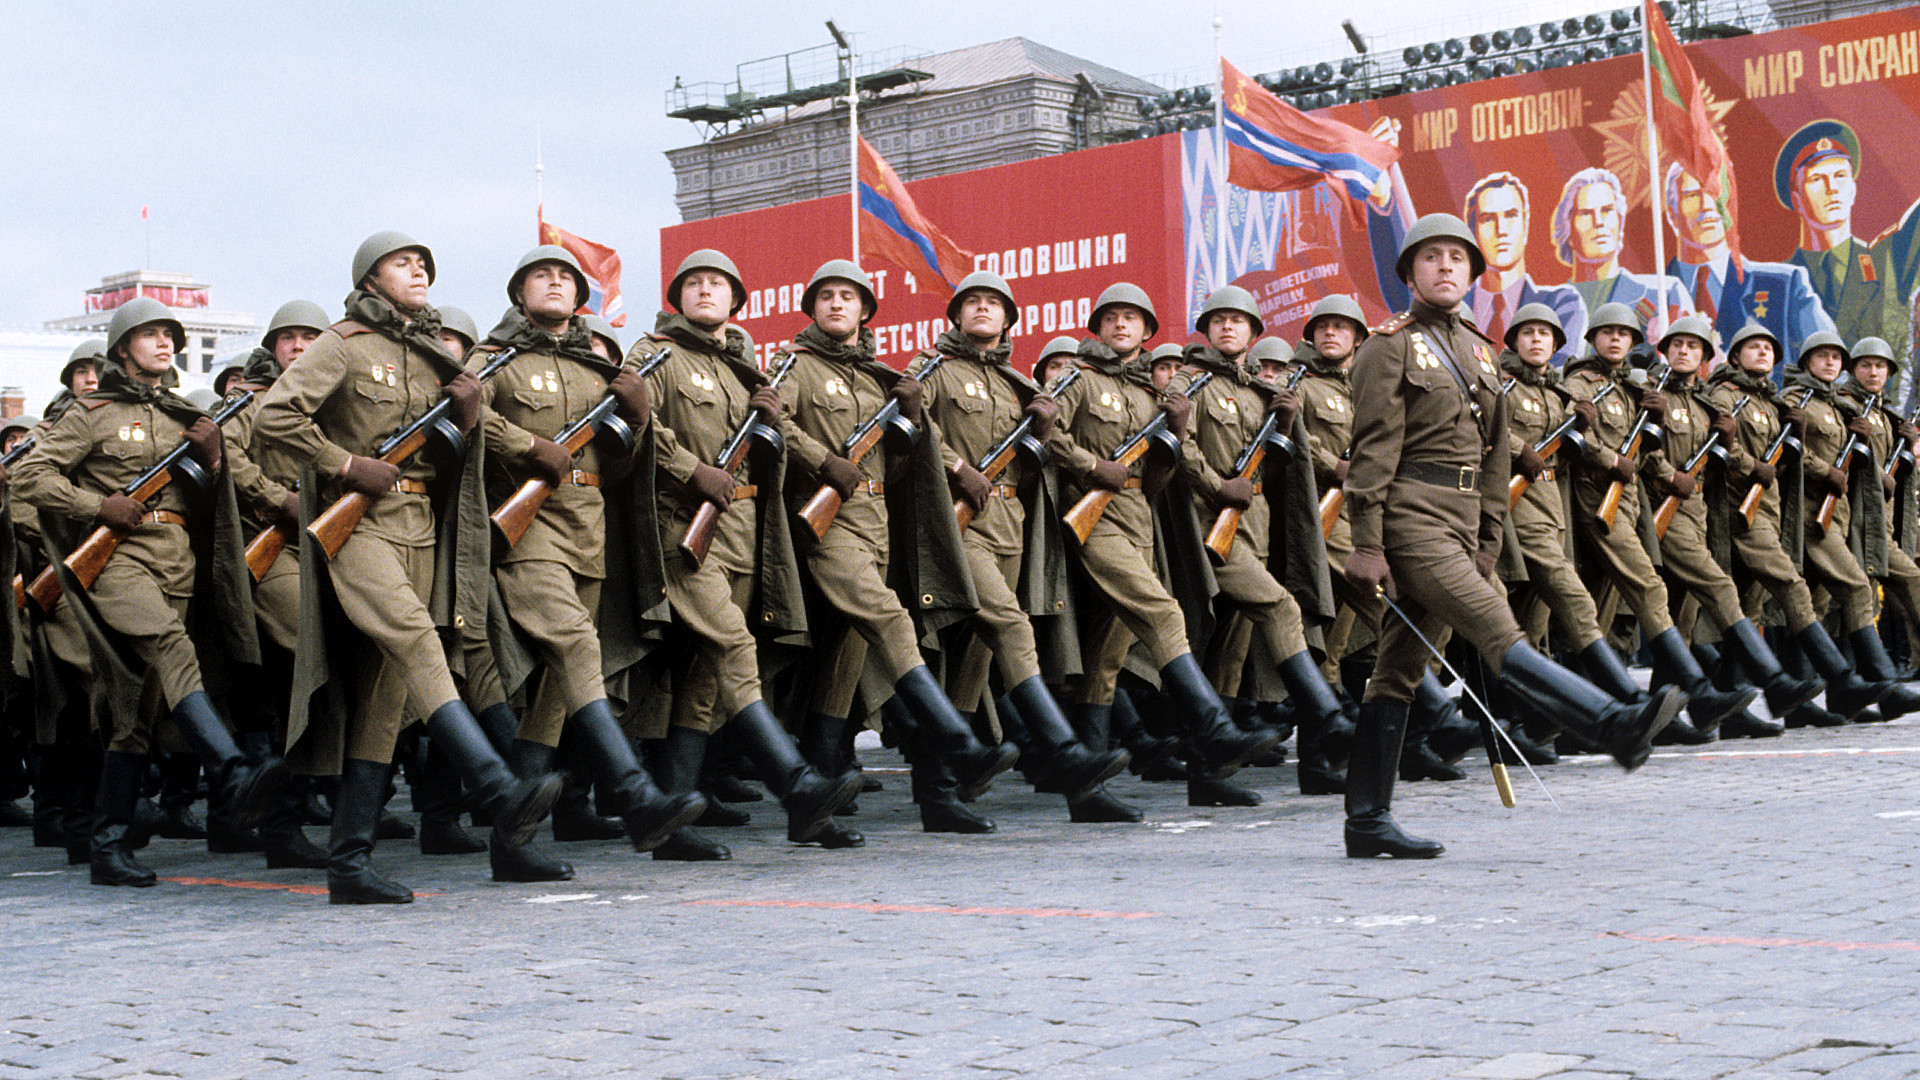 8 amazing facts about Moscow’s Victory Day Parade you never knew